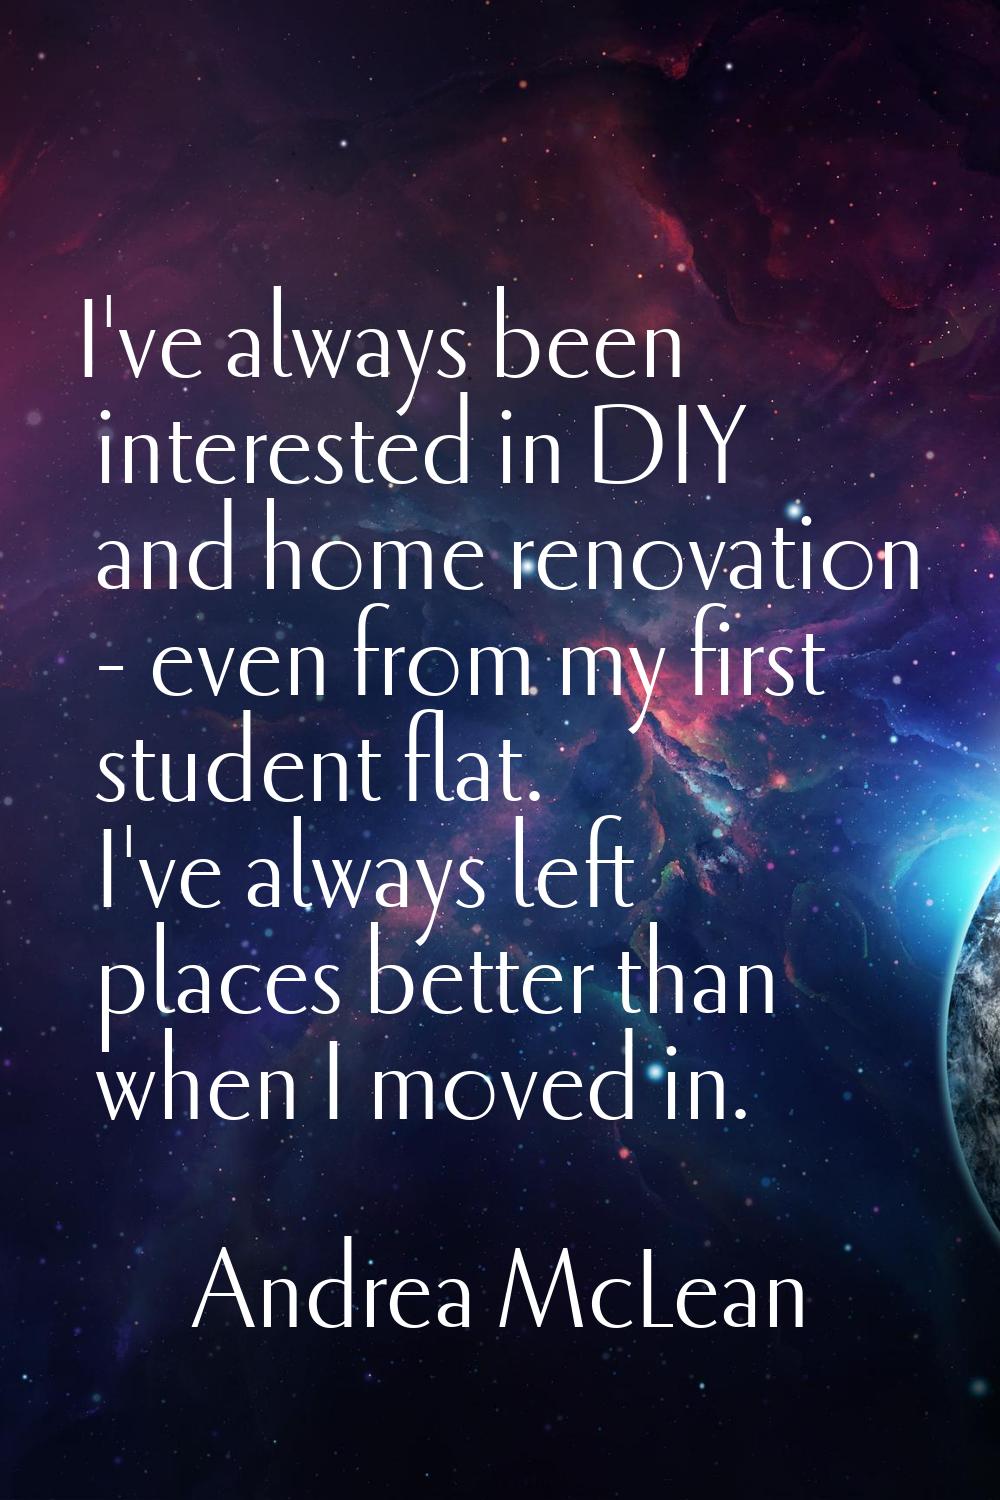 I've always been interested in DIY and home renovation - even from my first student flat. I've alwa